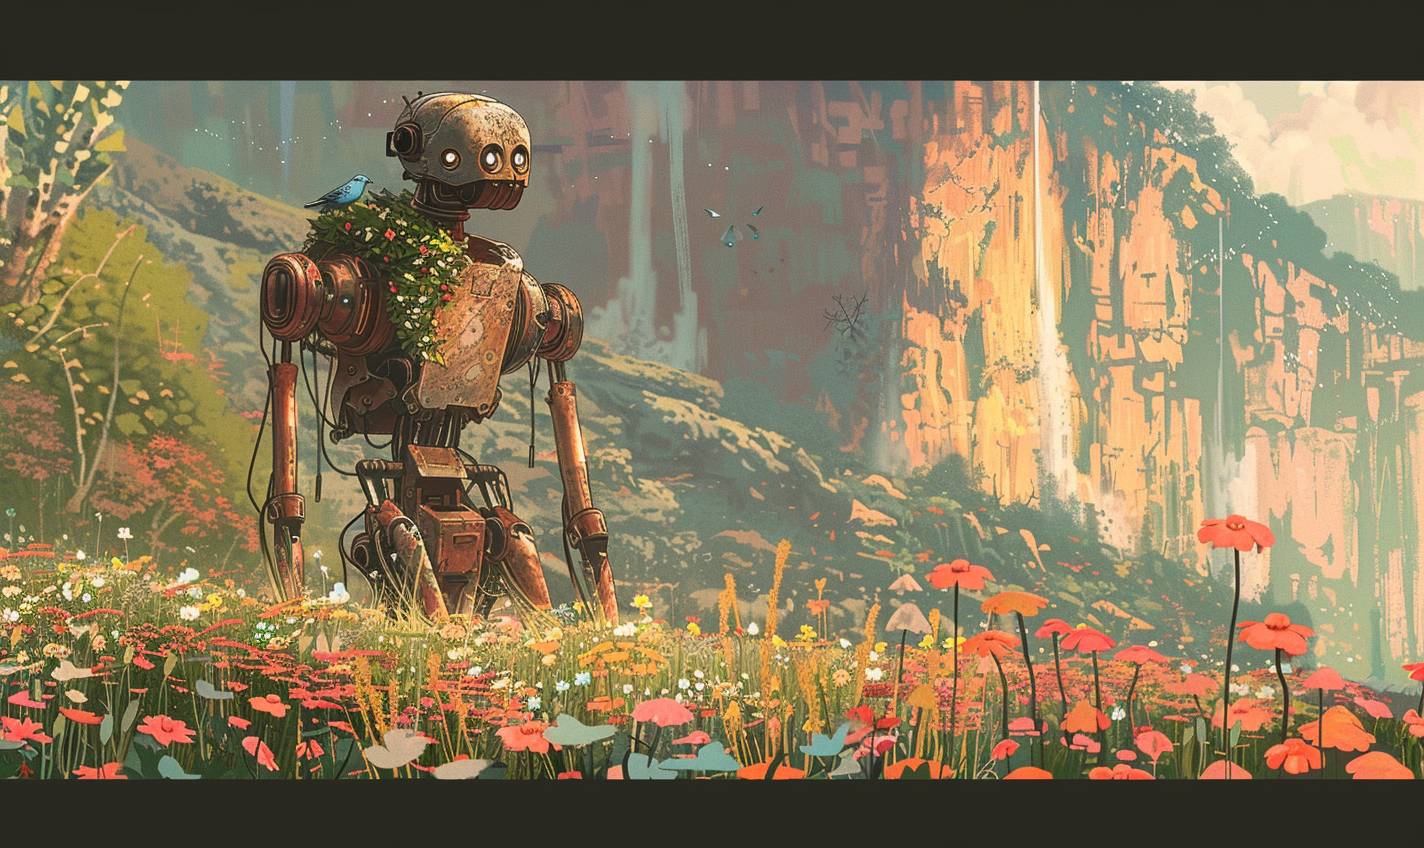 A weathered, wooden mech robot covered in flowering vines stands peacefully in a field of tall wildflowers, with a small bluebird resting on its outstretched hand. Digital cartoon, with warm colors and soft lines. A large cliff with a waterfall looms behind